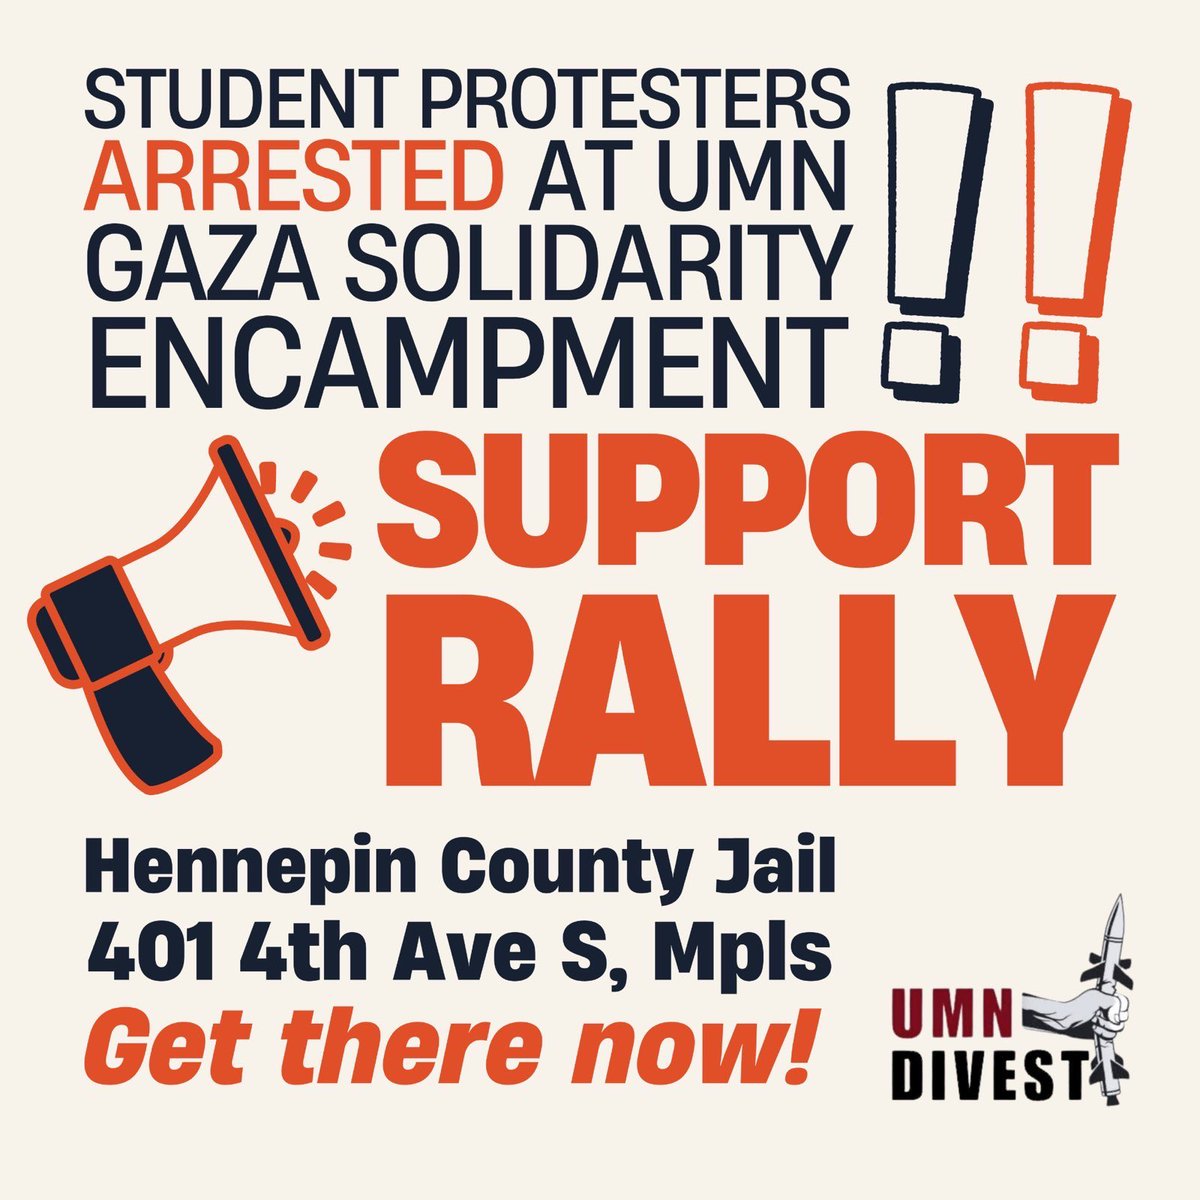 🚨STUDENT PROTESTERS ARRESTED AT UMN GAZA SOLIDARITY ENCAMPMENT! Jail support rally: ⏰NOW! 📍Hennepin County Jail, 401 4th Ave S, Minneapolis